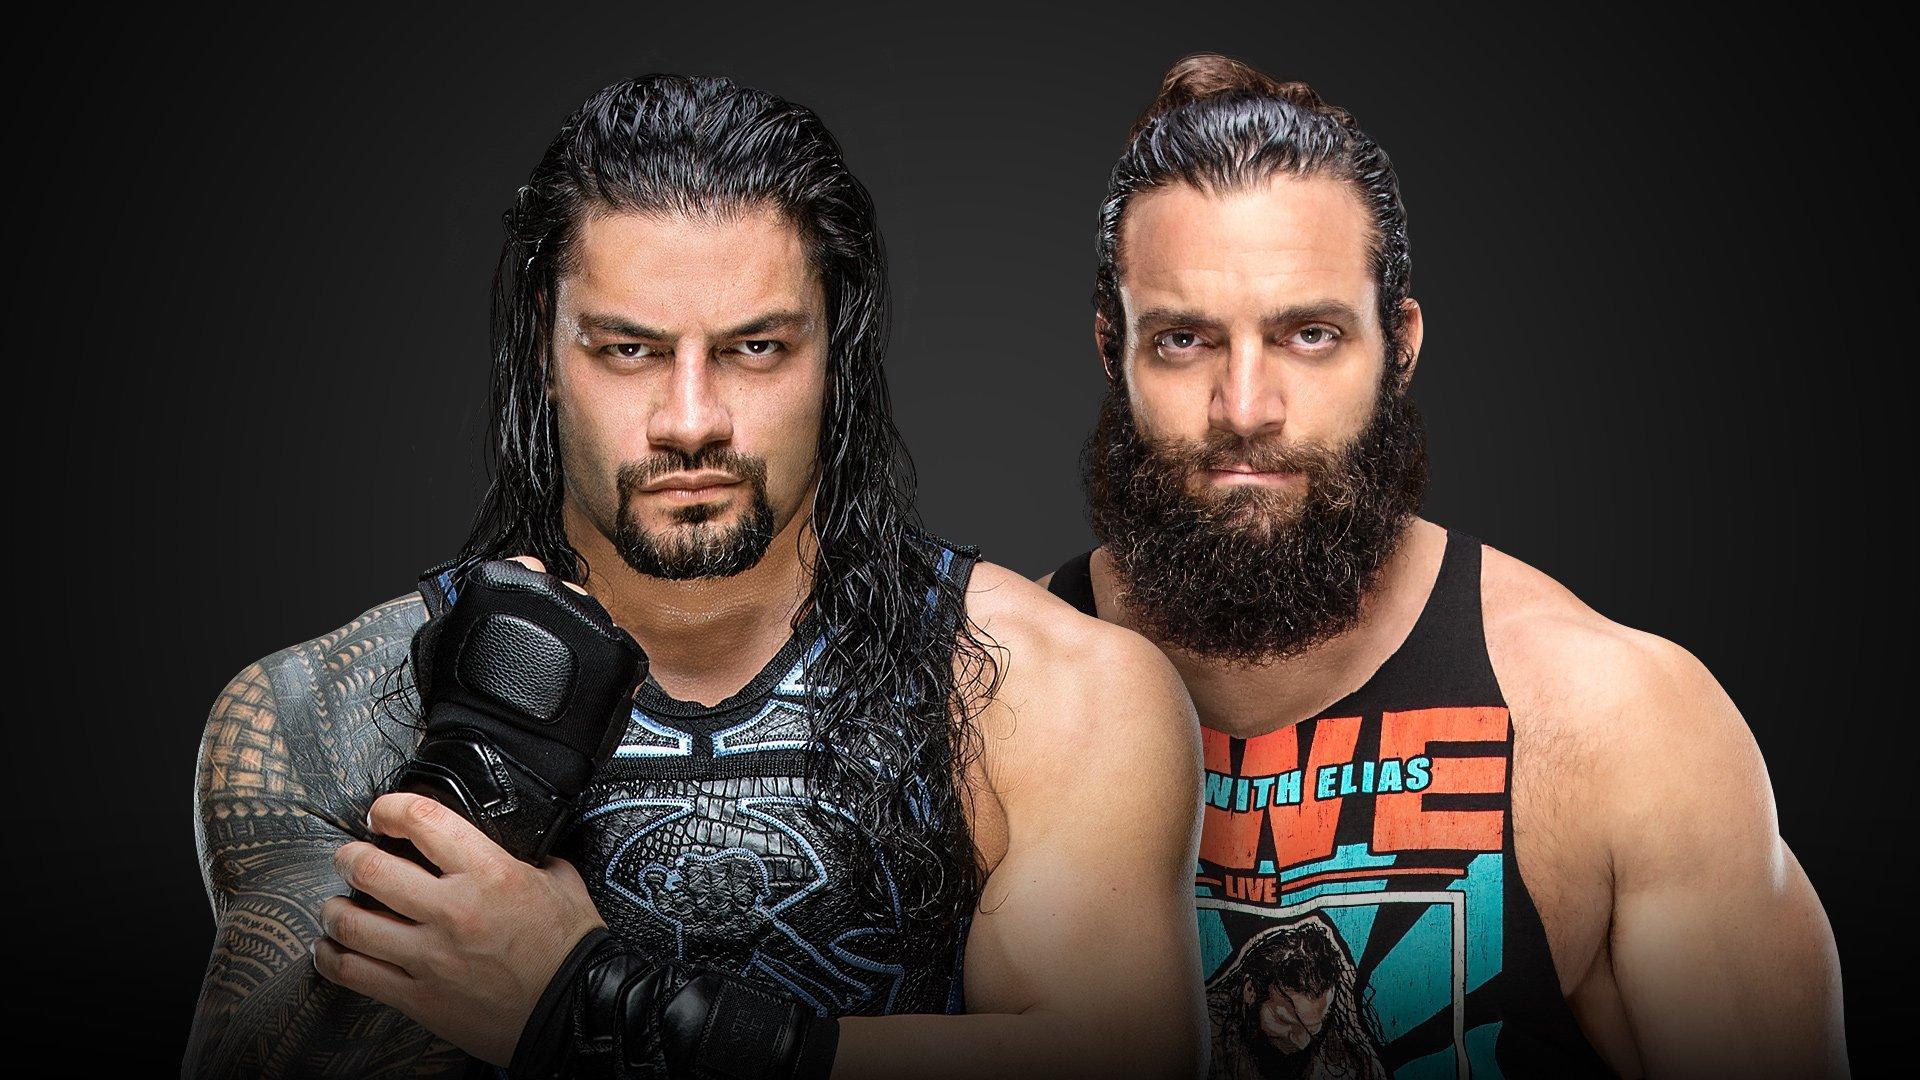 Roman Reigns vs. Elias set for WWE Money in the Bank